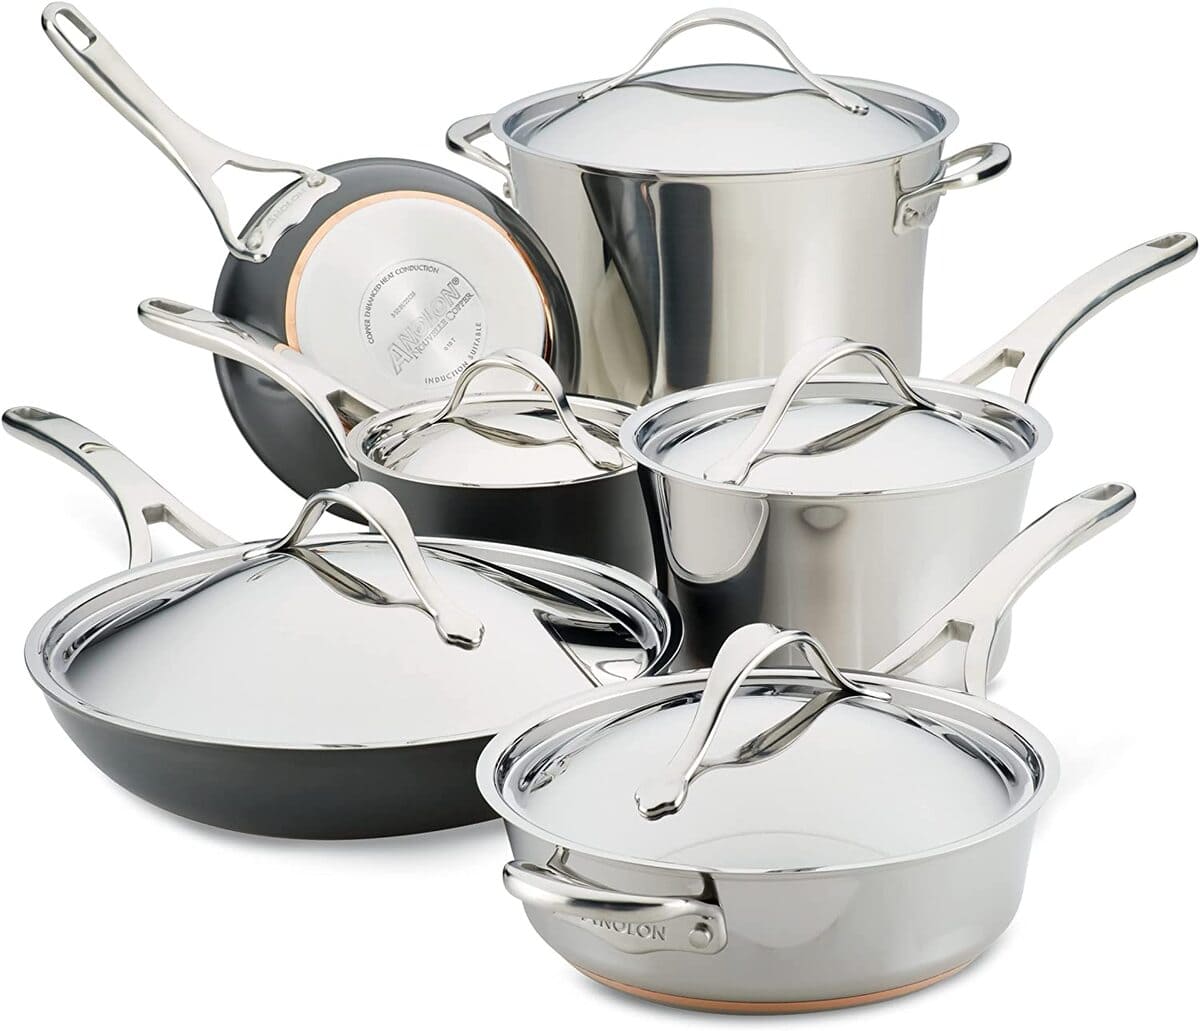 Is Anolon Cookware Safe